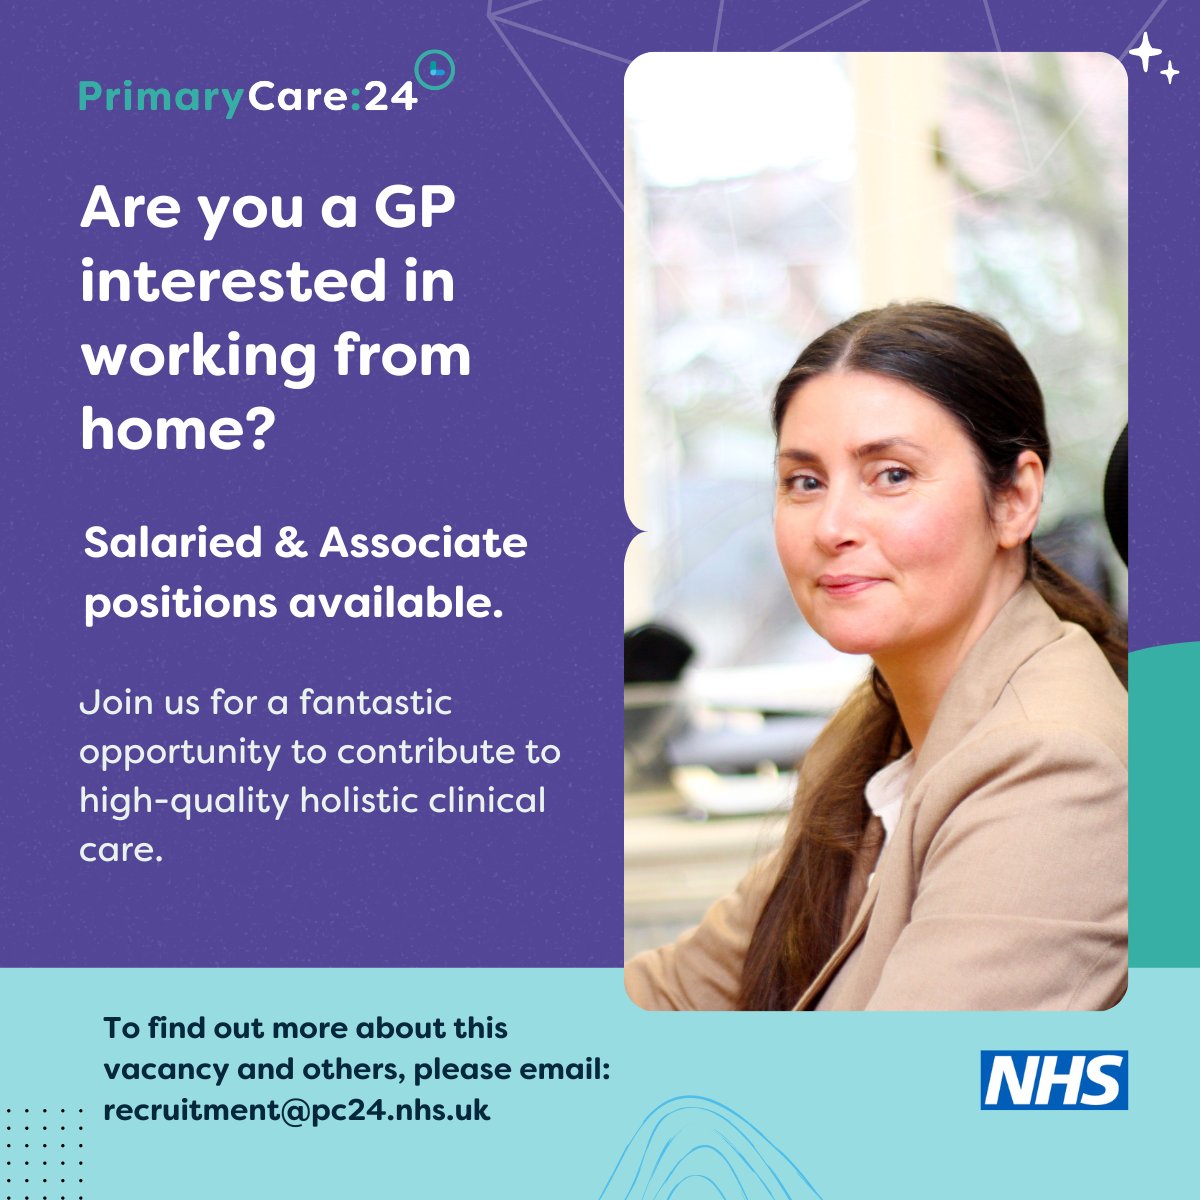 Are you a #GP interested in WFH? Would you like your hours to work around your other commitments? 
We're currently looking for GMC Registered General Practitioners (GPs), to join us at Primary Care 24.

Interested? Send our recruitment team an email.

#gpjobs #remotejobs